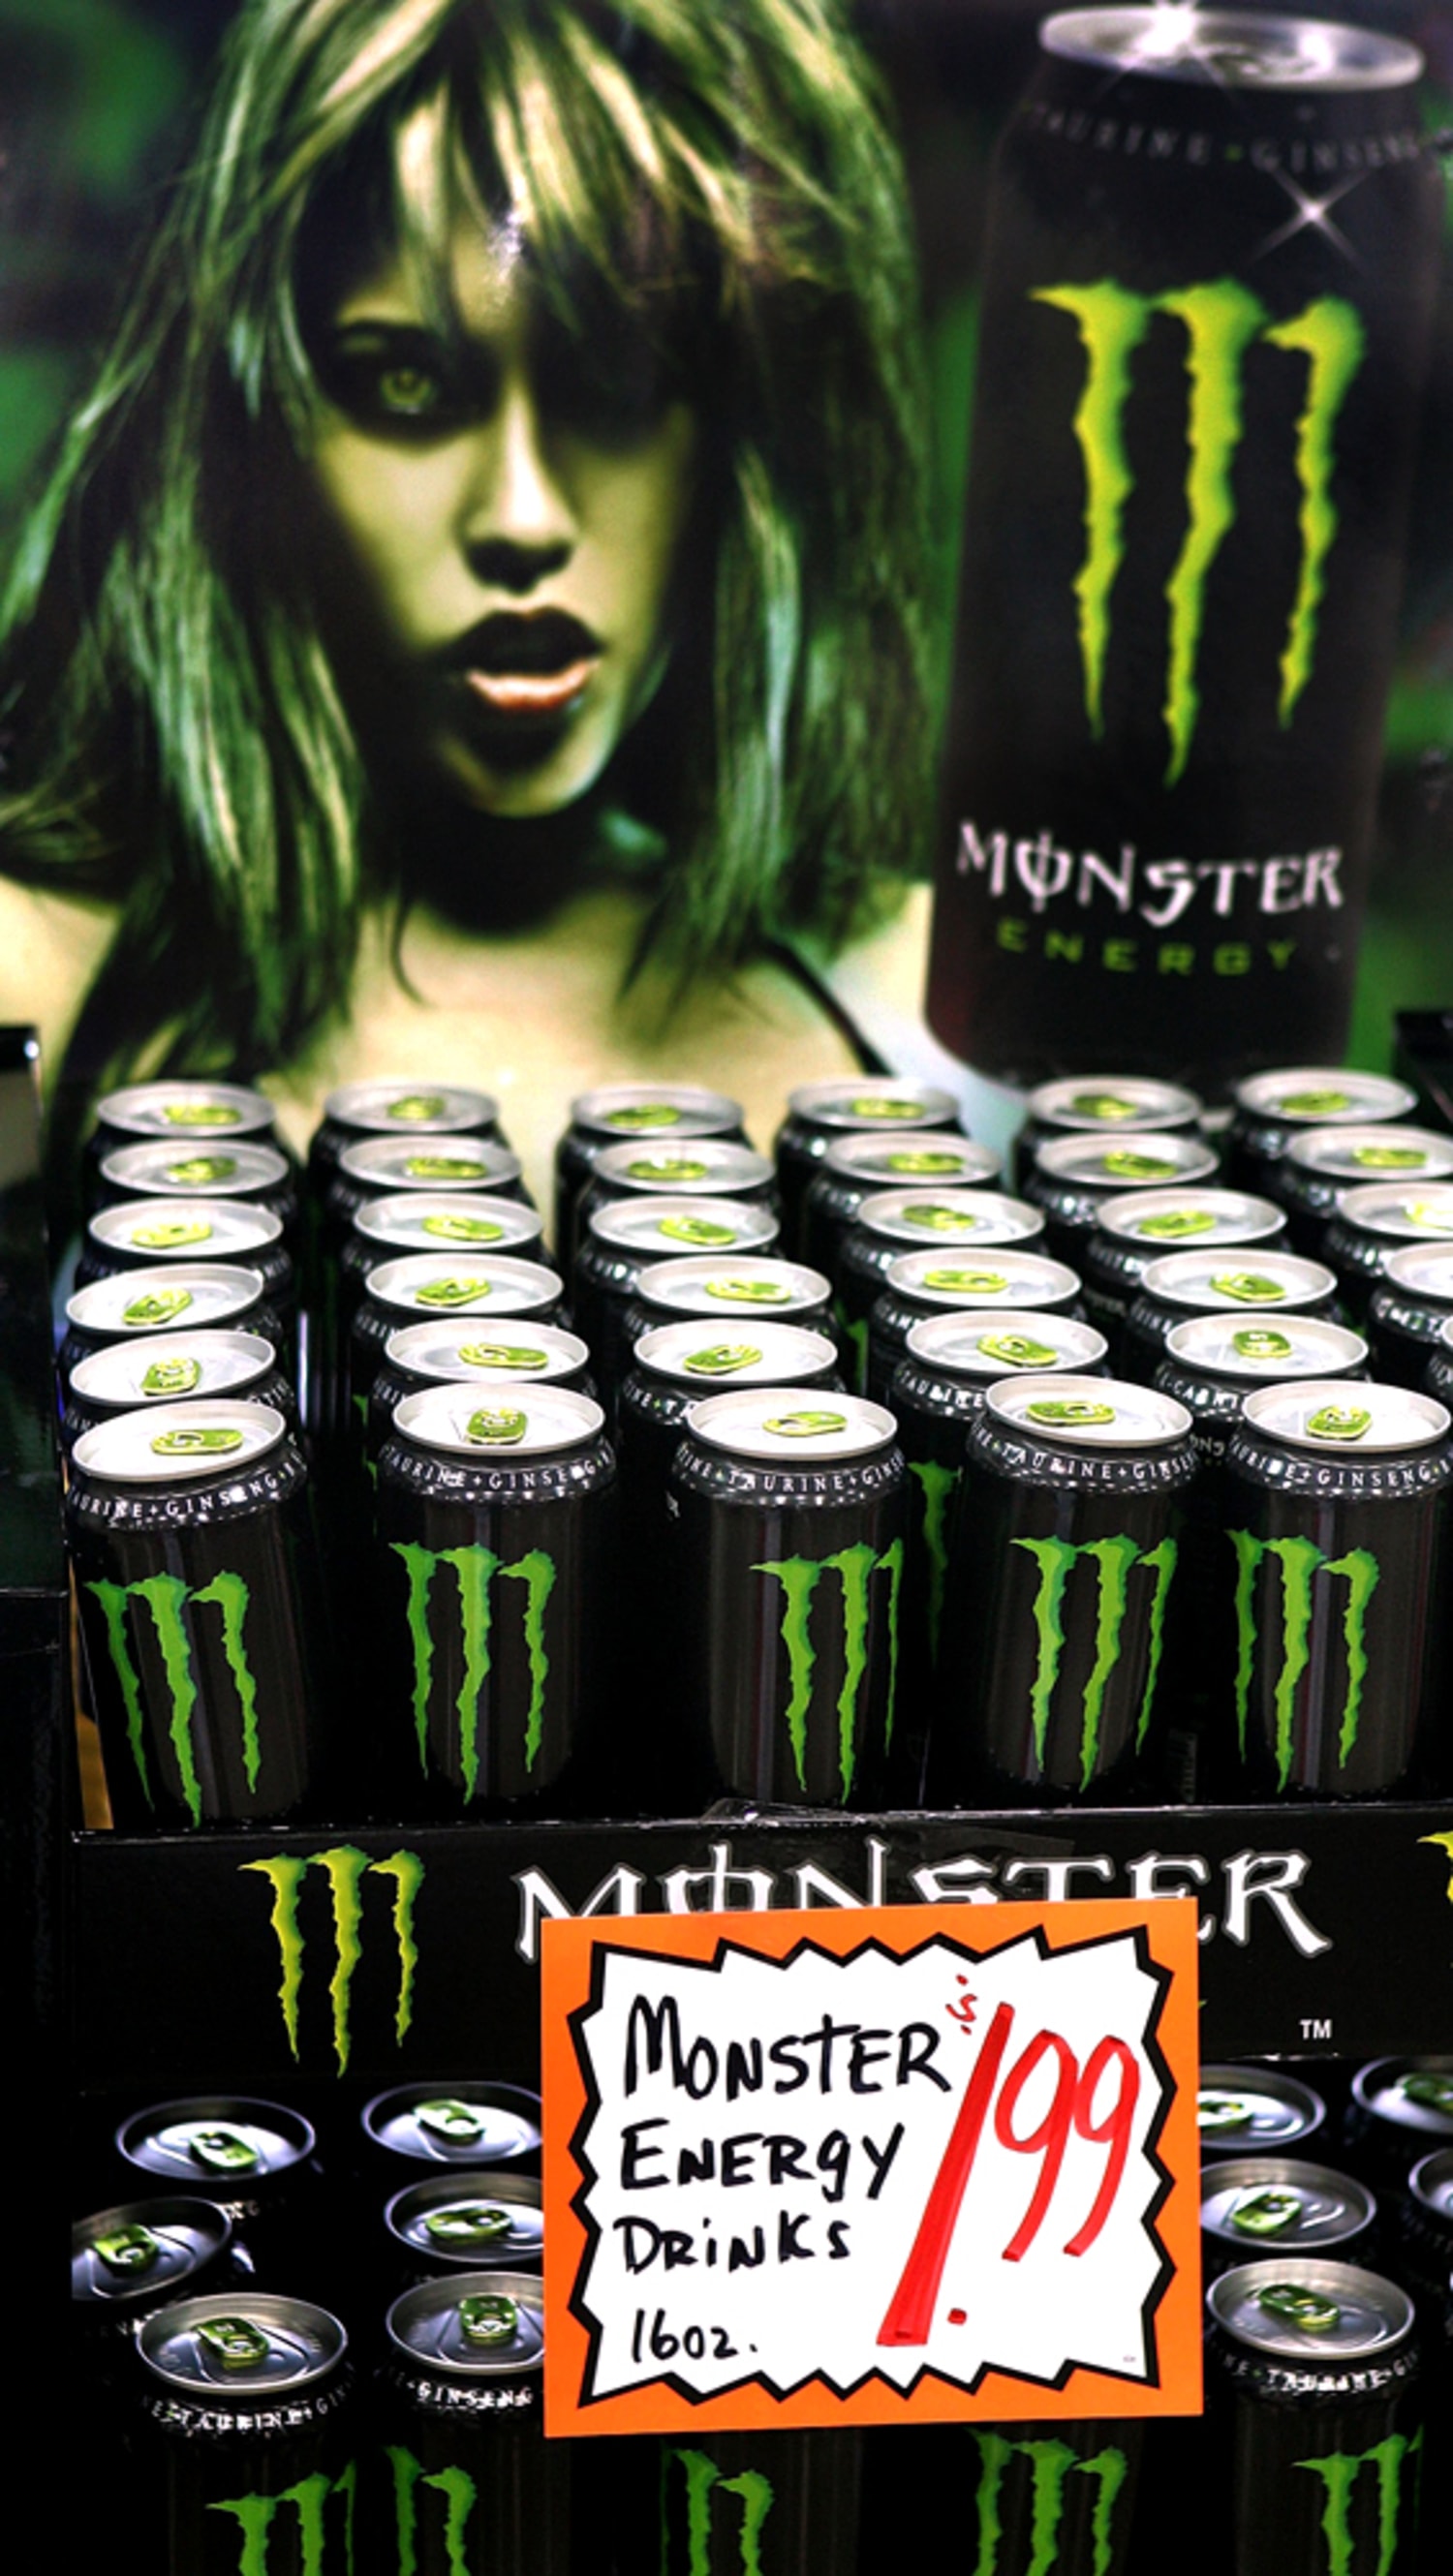 Monster Energy Drink may be linked to 5 deaths